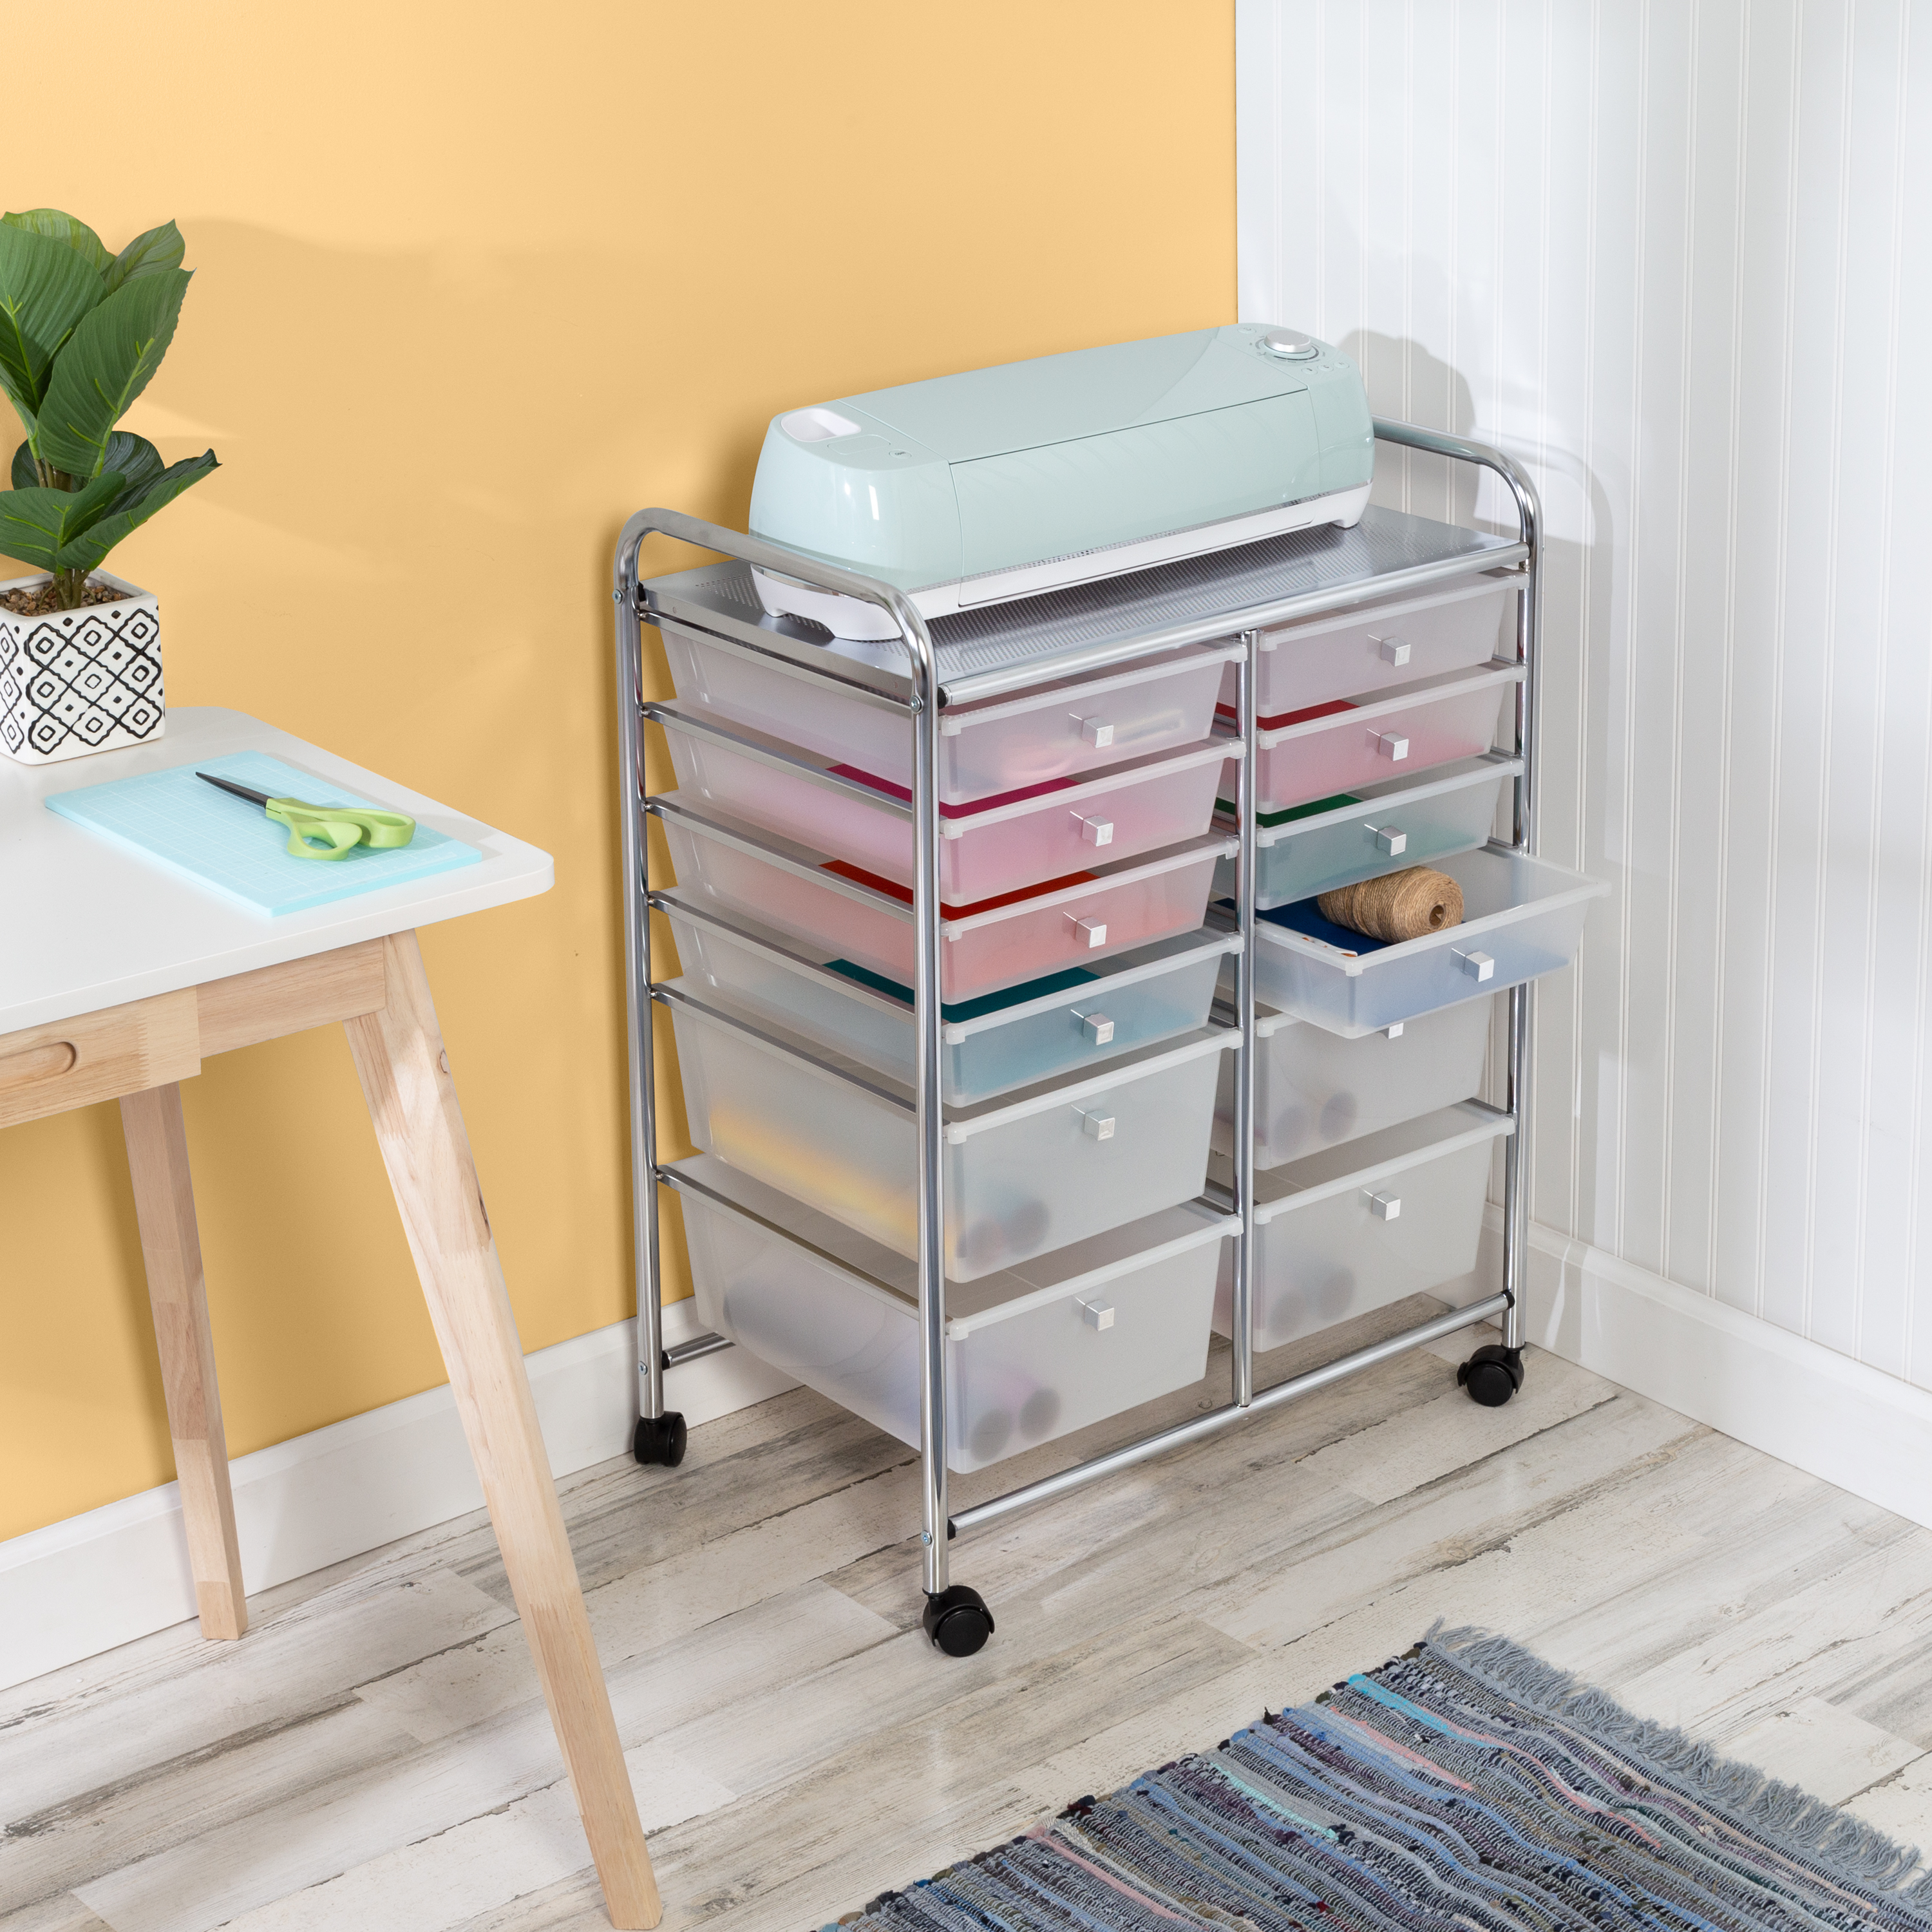 Honey-Can-Do Plastic 12-Drawer Rolling Craft Craft or Office Cart, Clear/Chrome - image 1 of 10